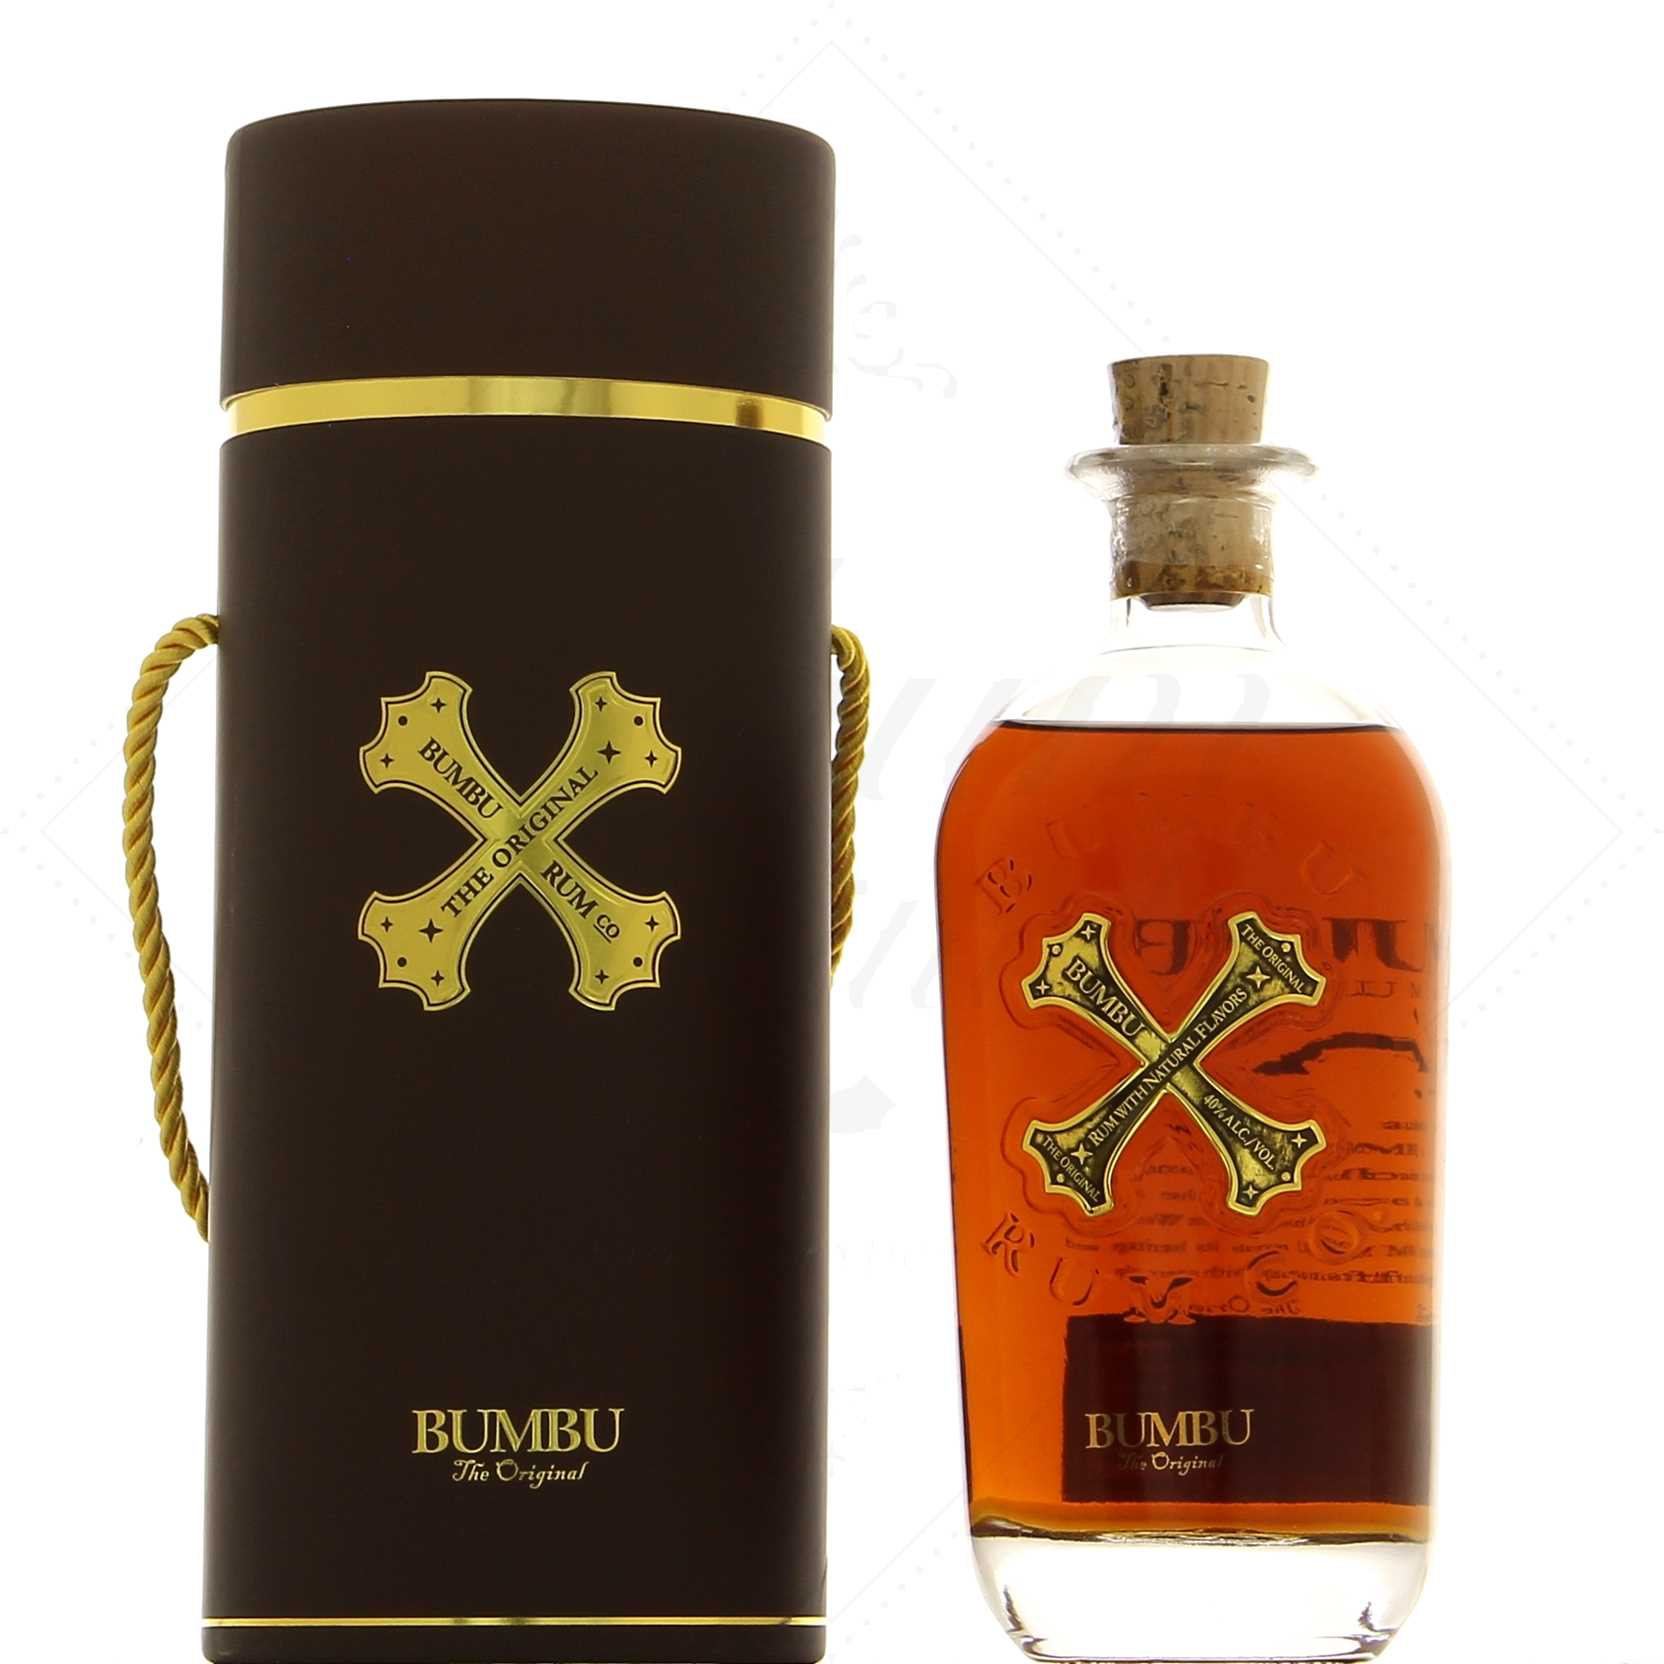 Bumbu: discover the brand's products - Rhum Attitude